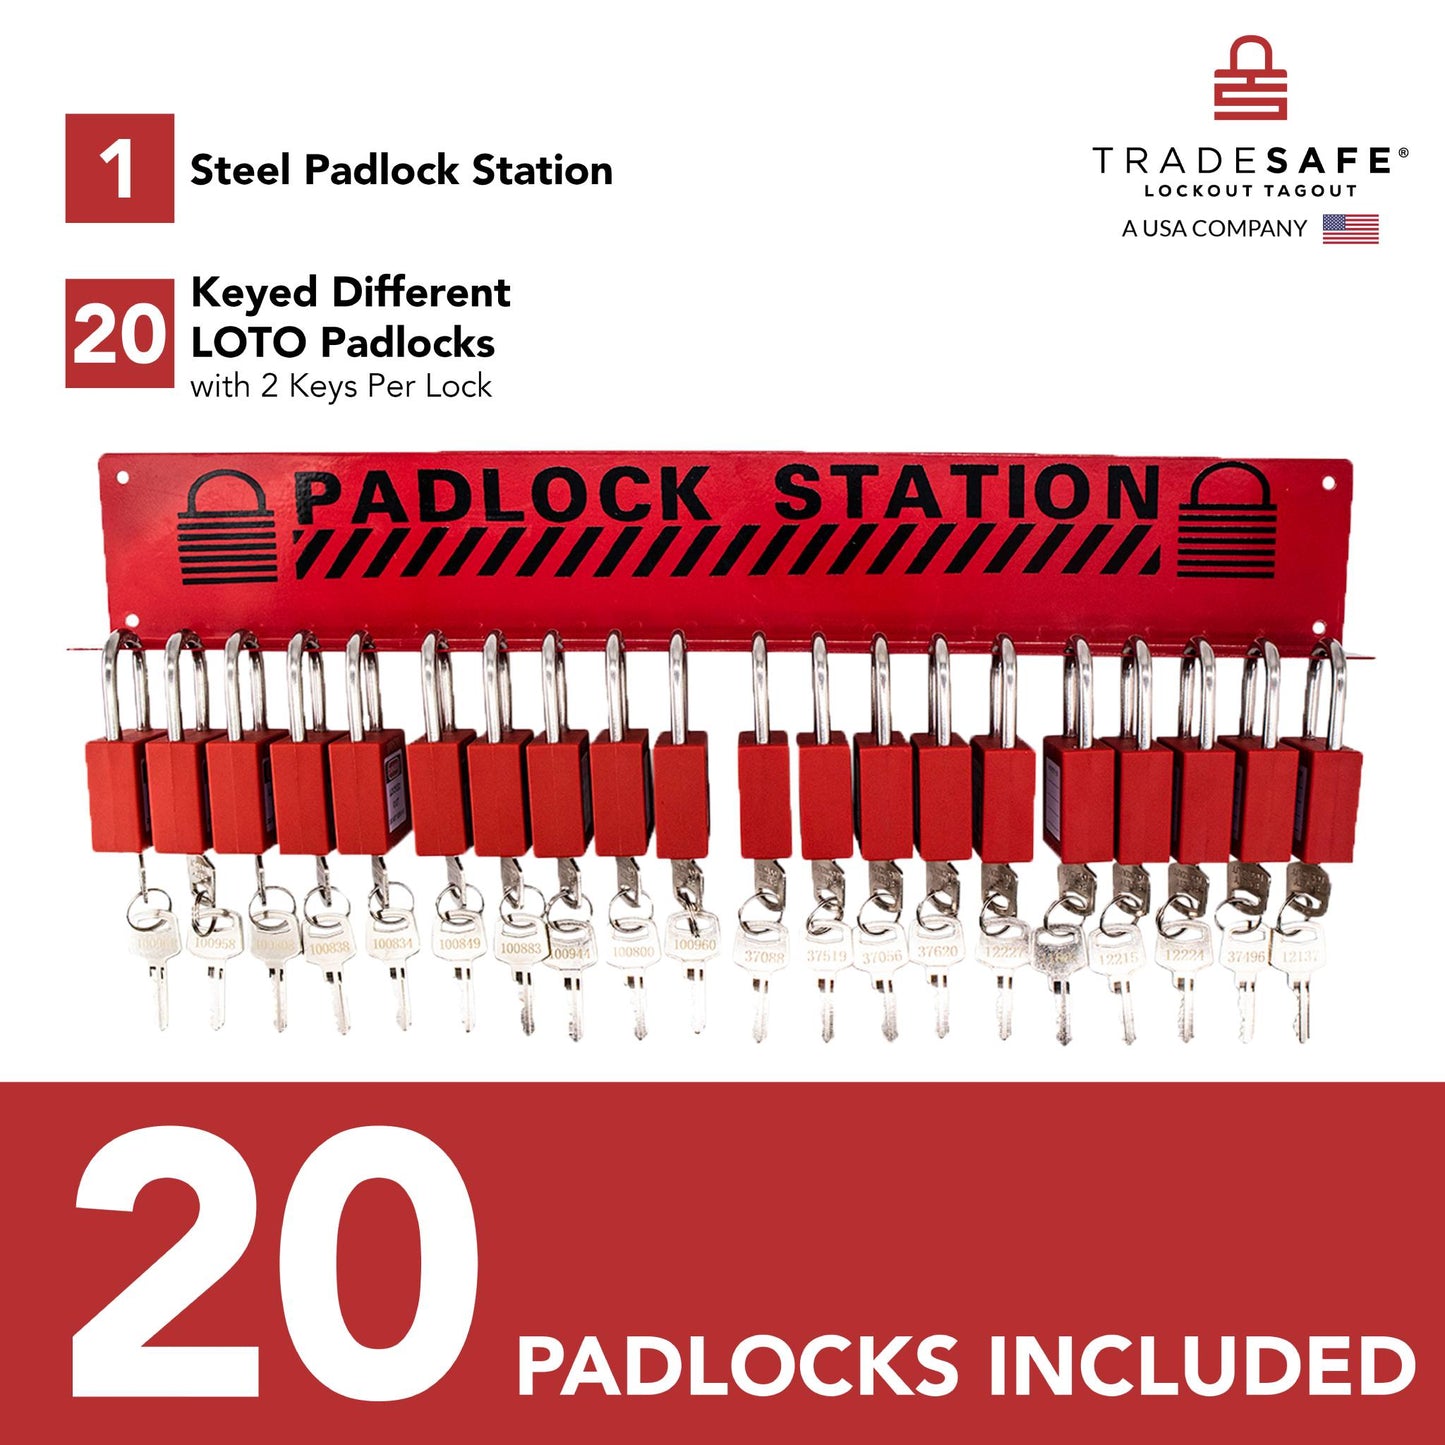 infographic of a padlock station with 20 loto padlocks indicating components and quantities